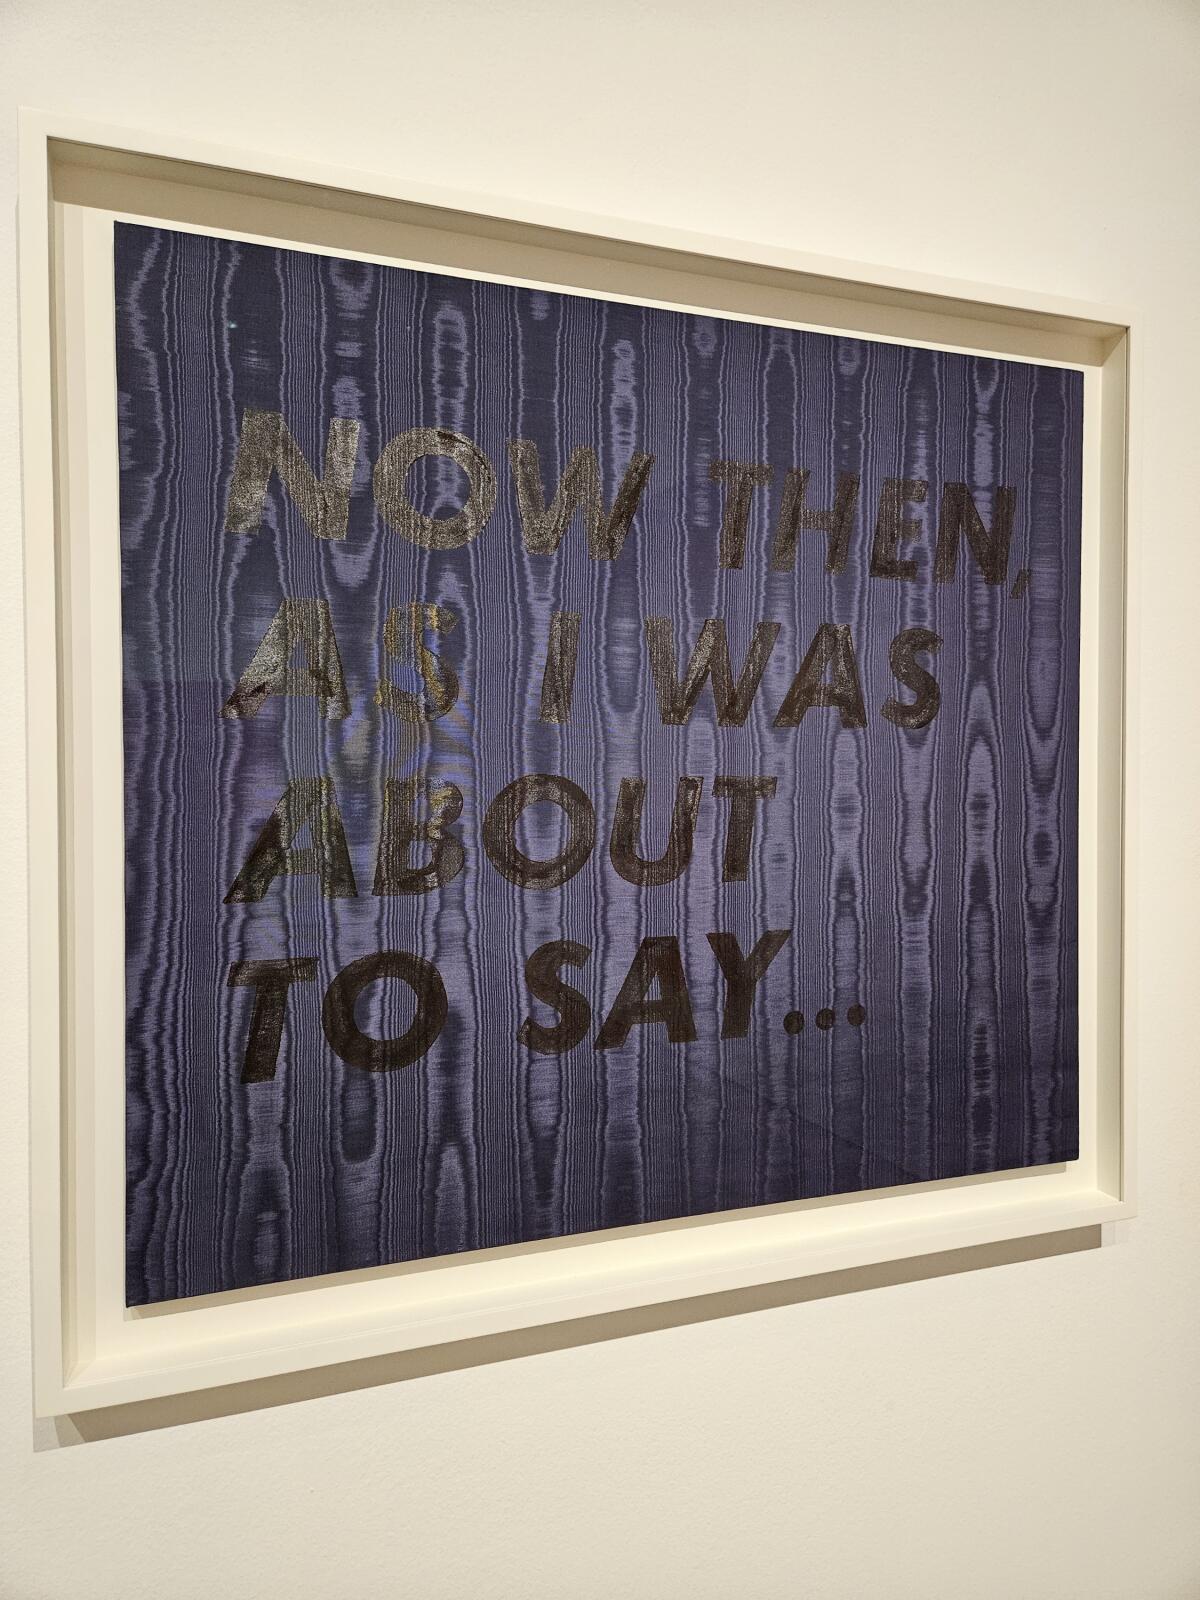 Ed Ruscha, "Now Then, As I Was About to Say...," 1973, shellac on moiré rayon